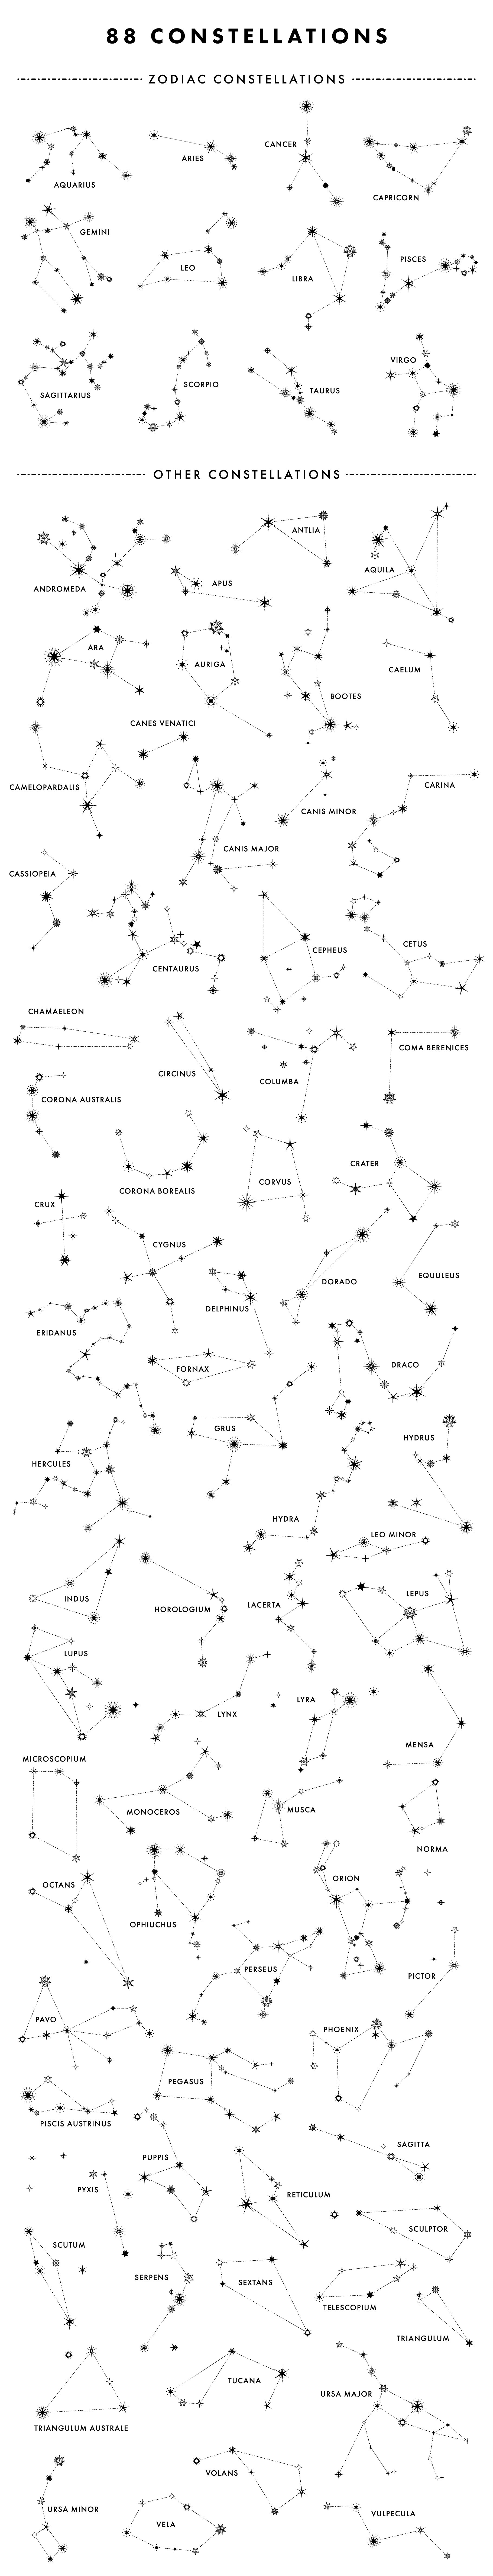 88 star constellations by megs lang prvw 012 498